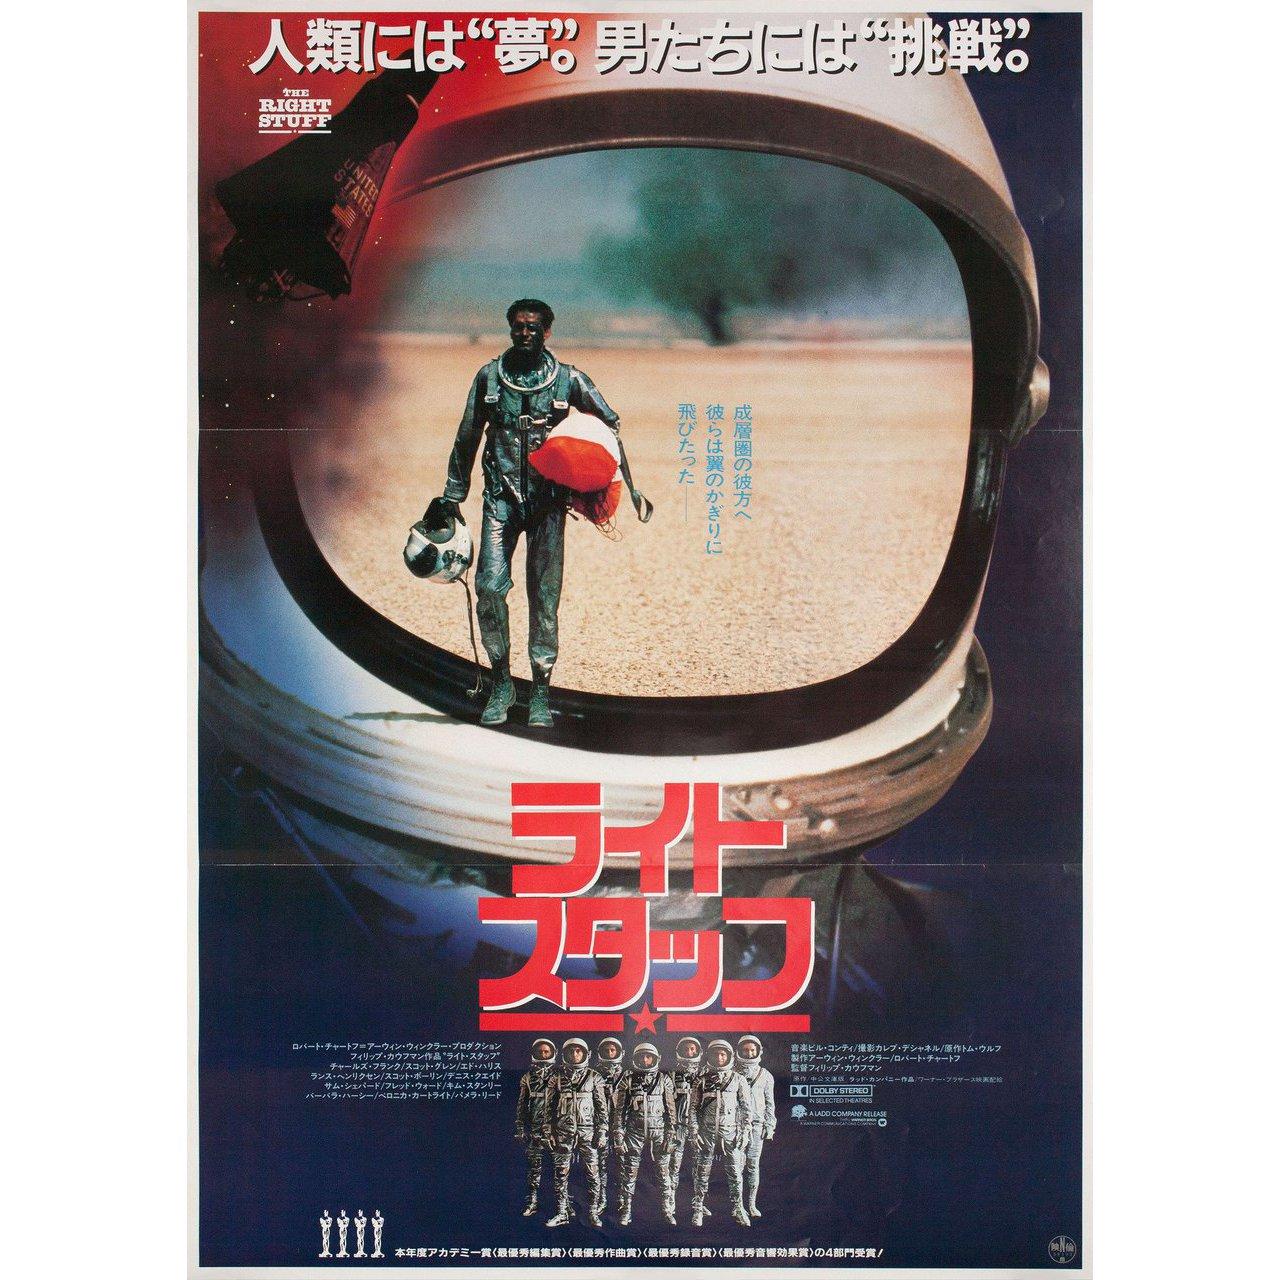 Original 1984 Japanese B2 poster for the film The Right Stuff directed by Philip Kaufman with Sam Shepard / Scott Glenn / Ed Harris / Dennis Quaid. Fine condition, rolled. Please note: the size is stated in inches and the actual size can vary by an